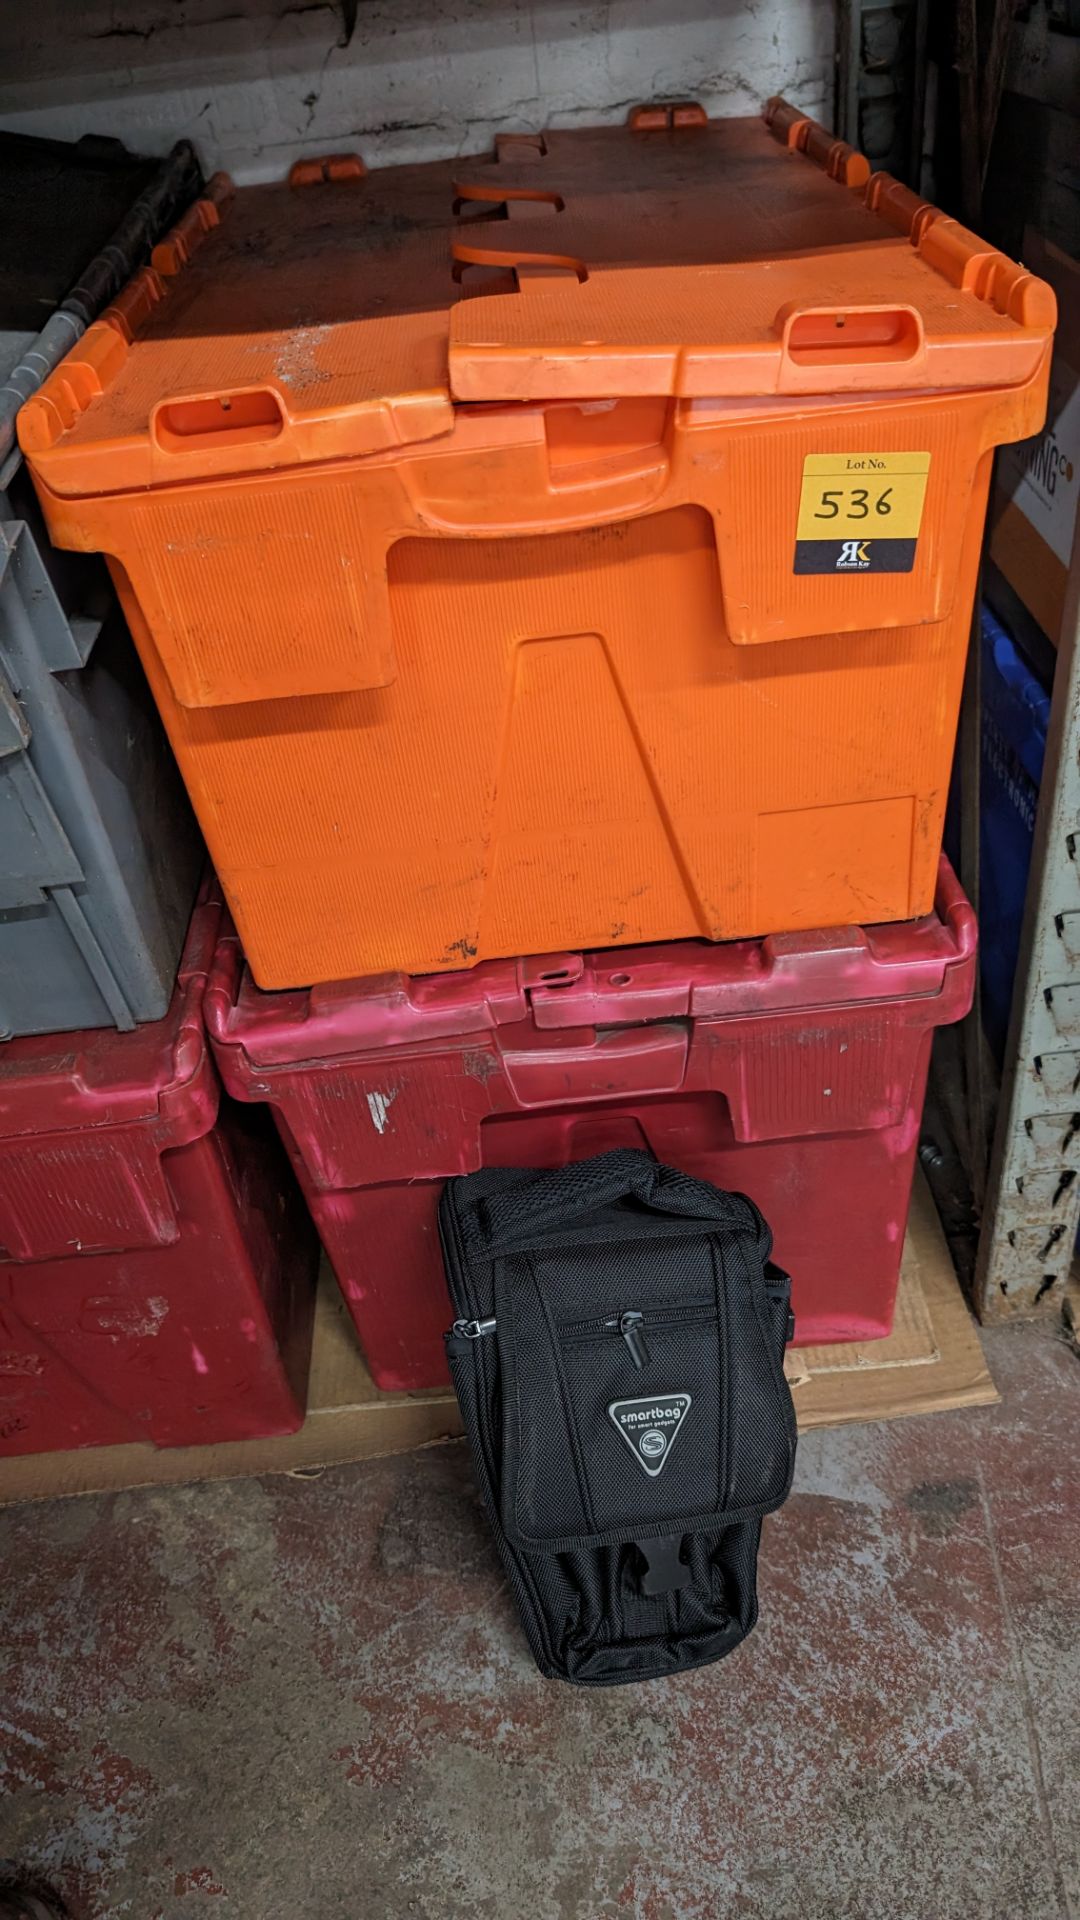 20 off camera bags - no straps. The contents of 2 crates